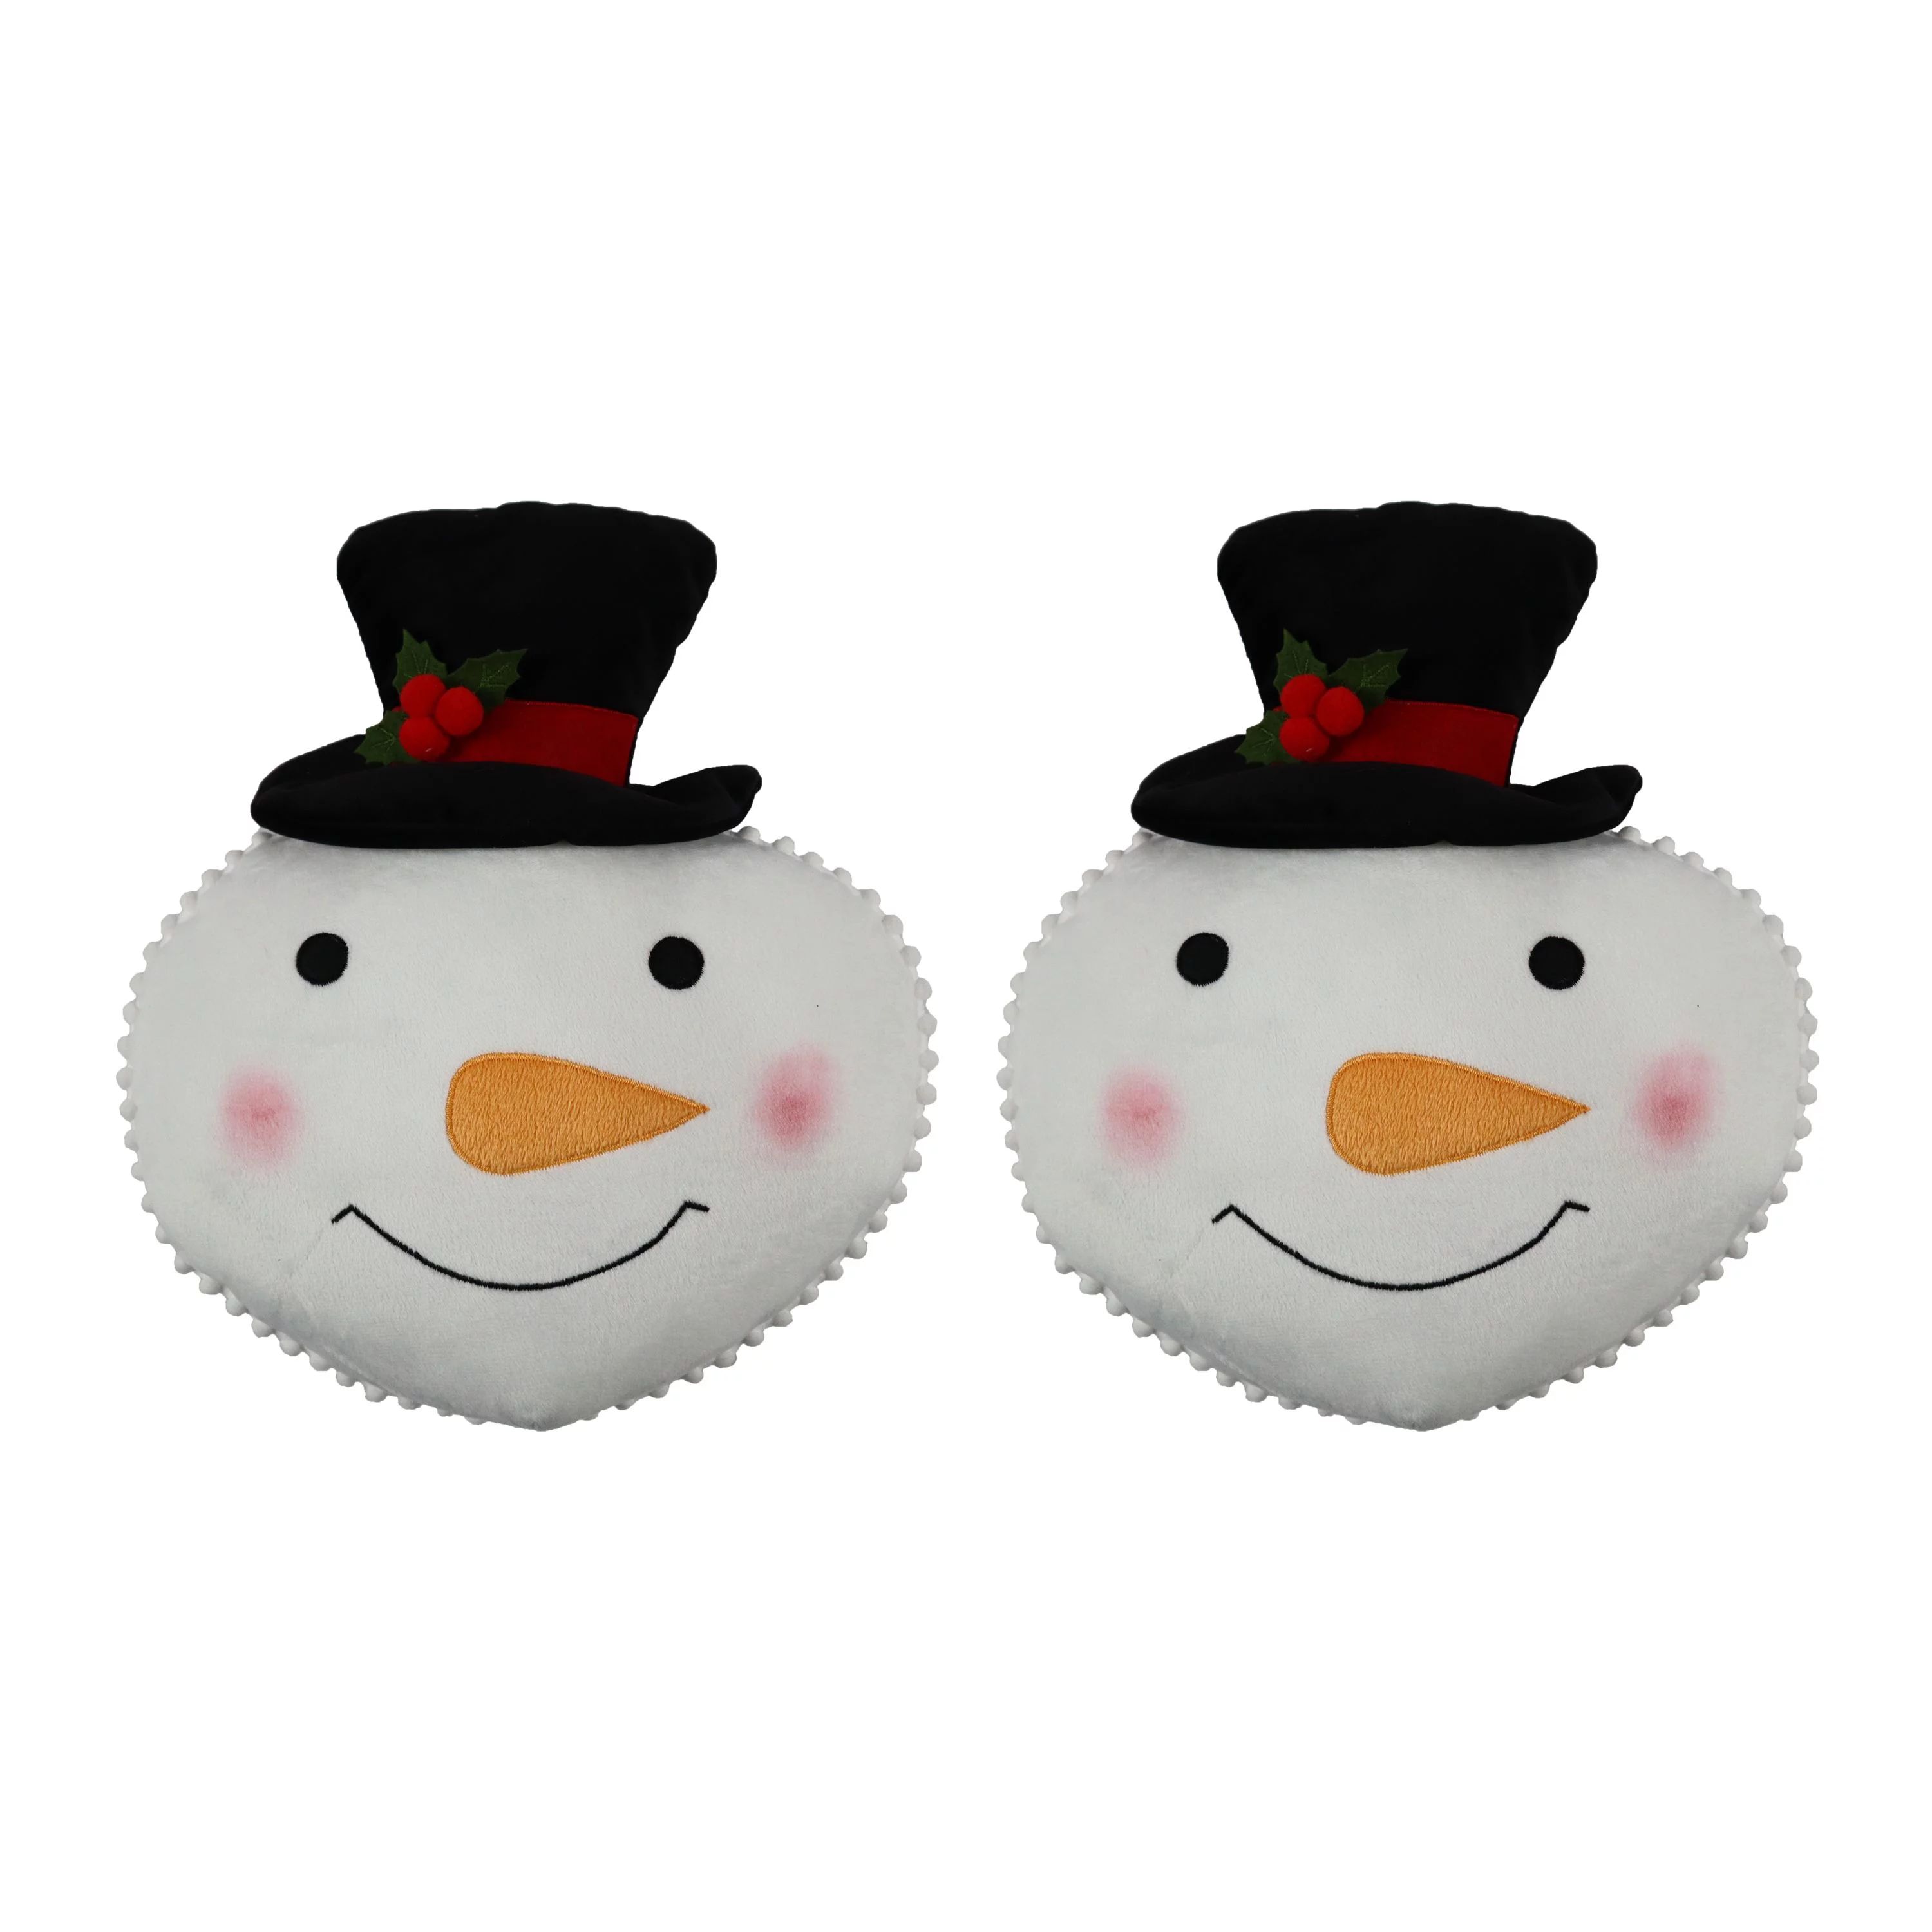 Holiday Time 14inch Snowman Shaped Decorative Pillow, White and Black, 2 Count per Pack | Walmart (US)